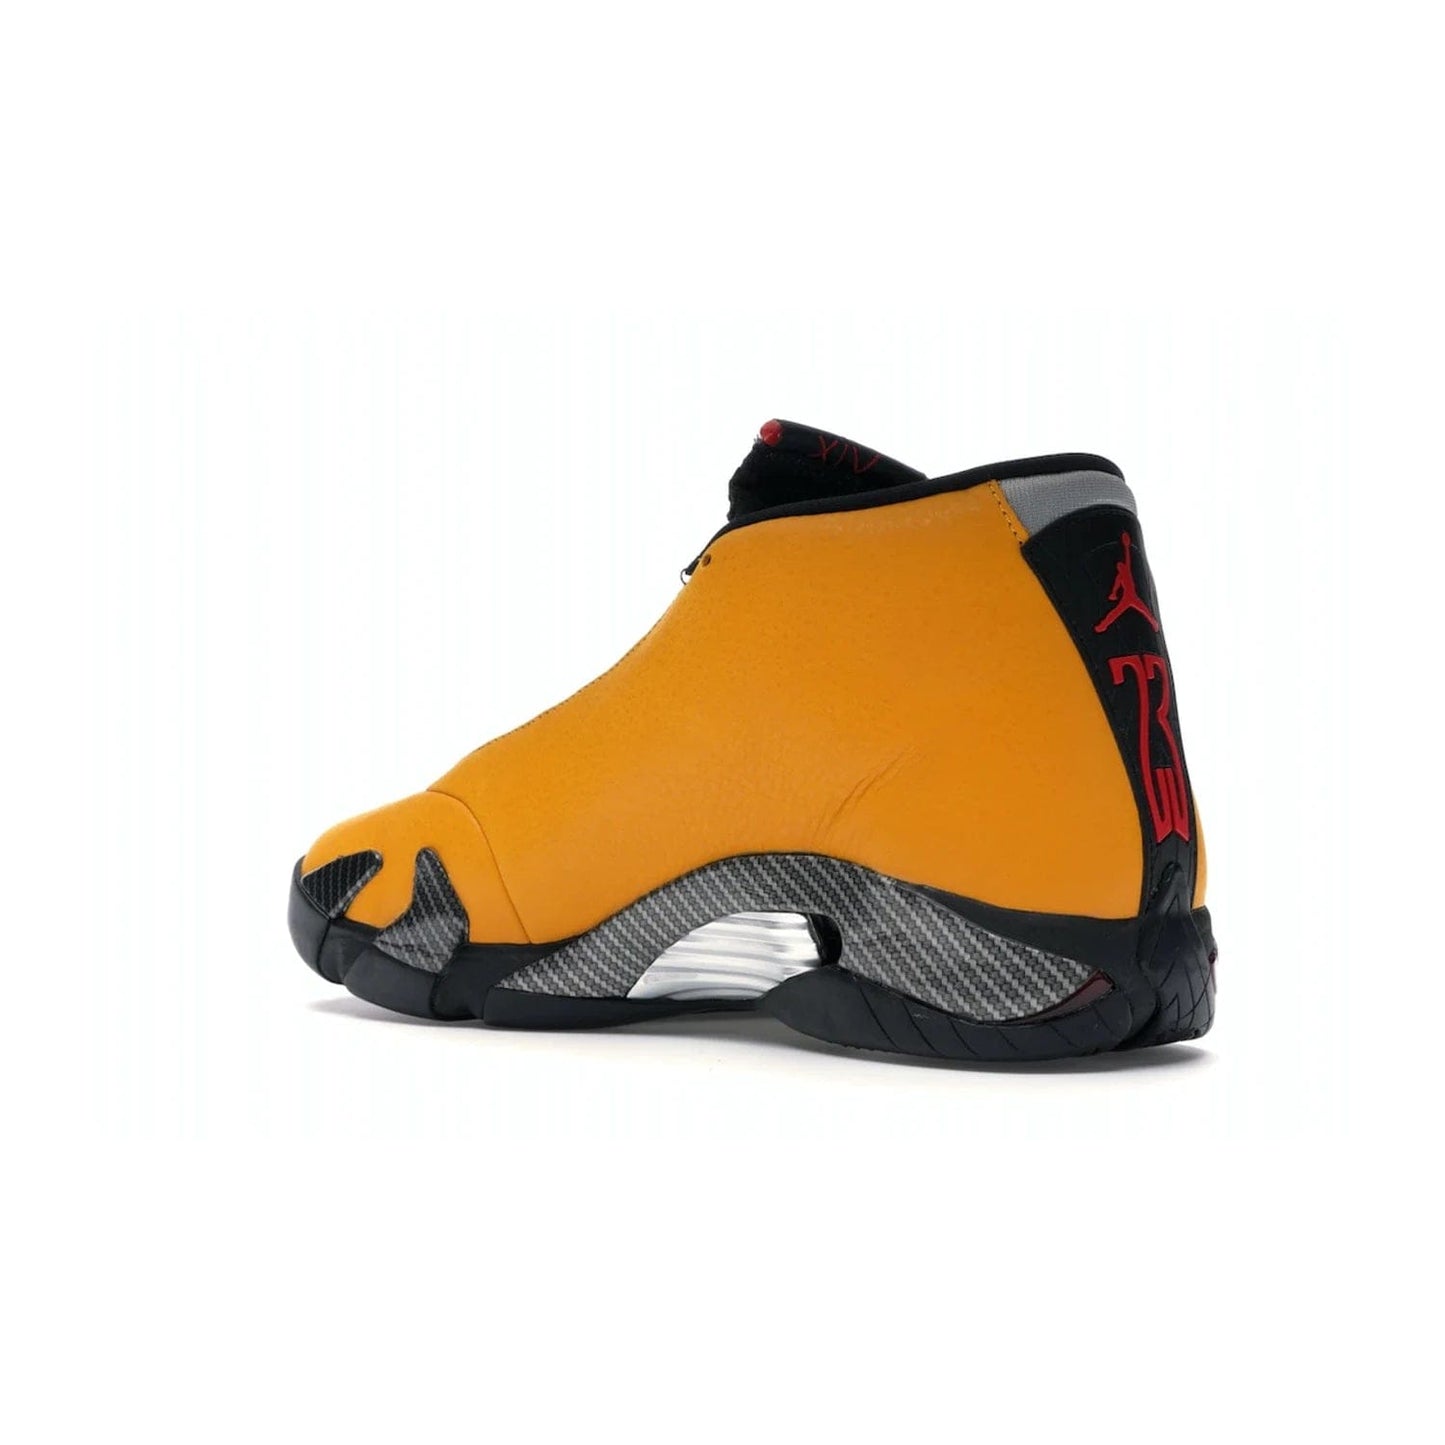 Jordan 14 Retro University Gold - Image 23 - Only at www.BallersClubKickz.com - Air Jordan 14 Retro University Gold: High-quality leather sneaker with Jumpman, tongue & heel logos. Zoom Air units & herringbone traction for superior comfort. University Gold outsole for stylish streetwear.